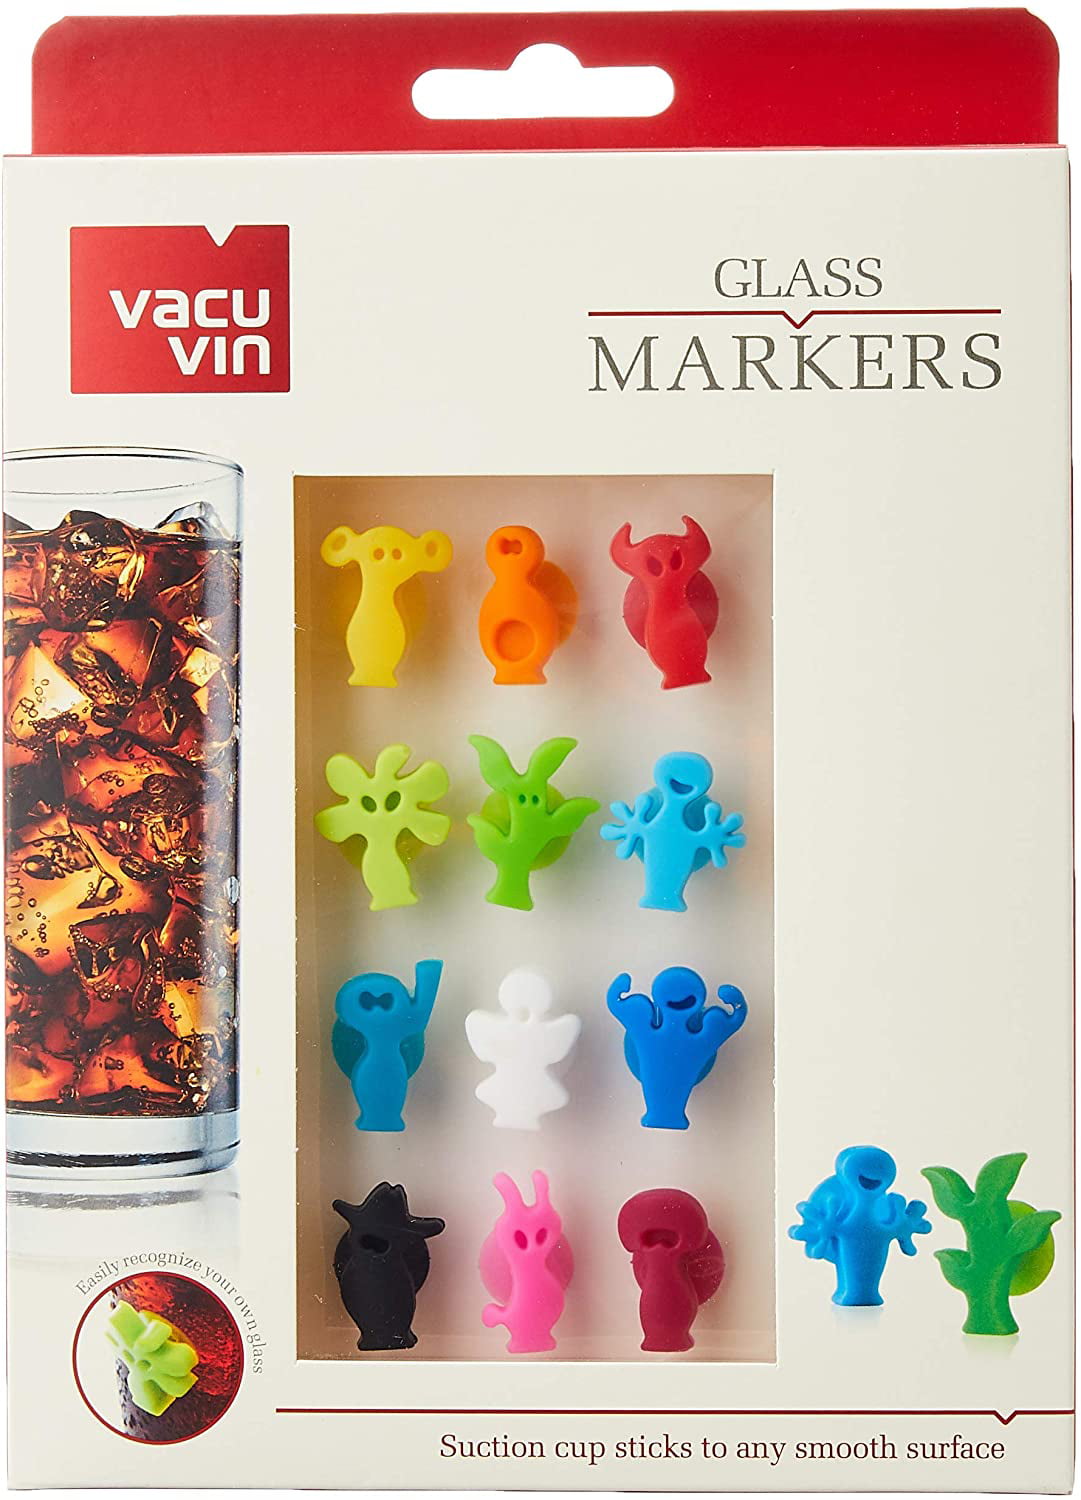 Vacuvin Glass Markers-s/12 Party People Walmart.com